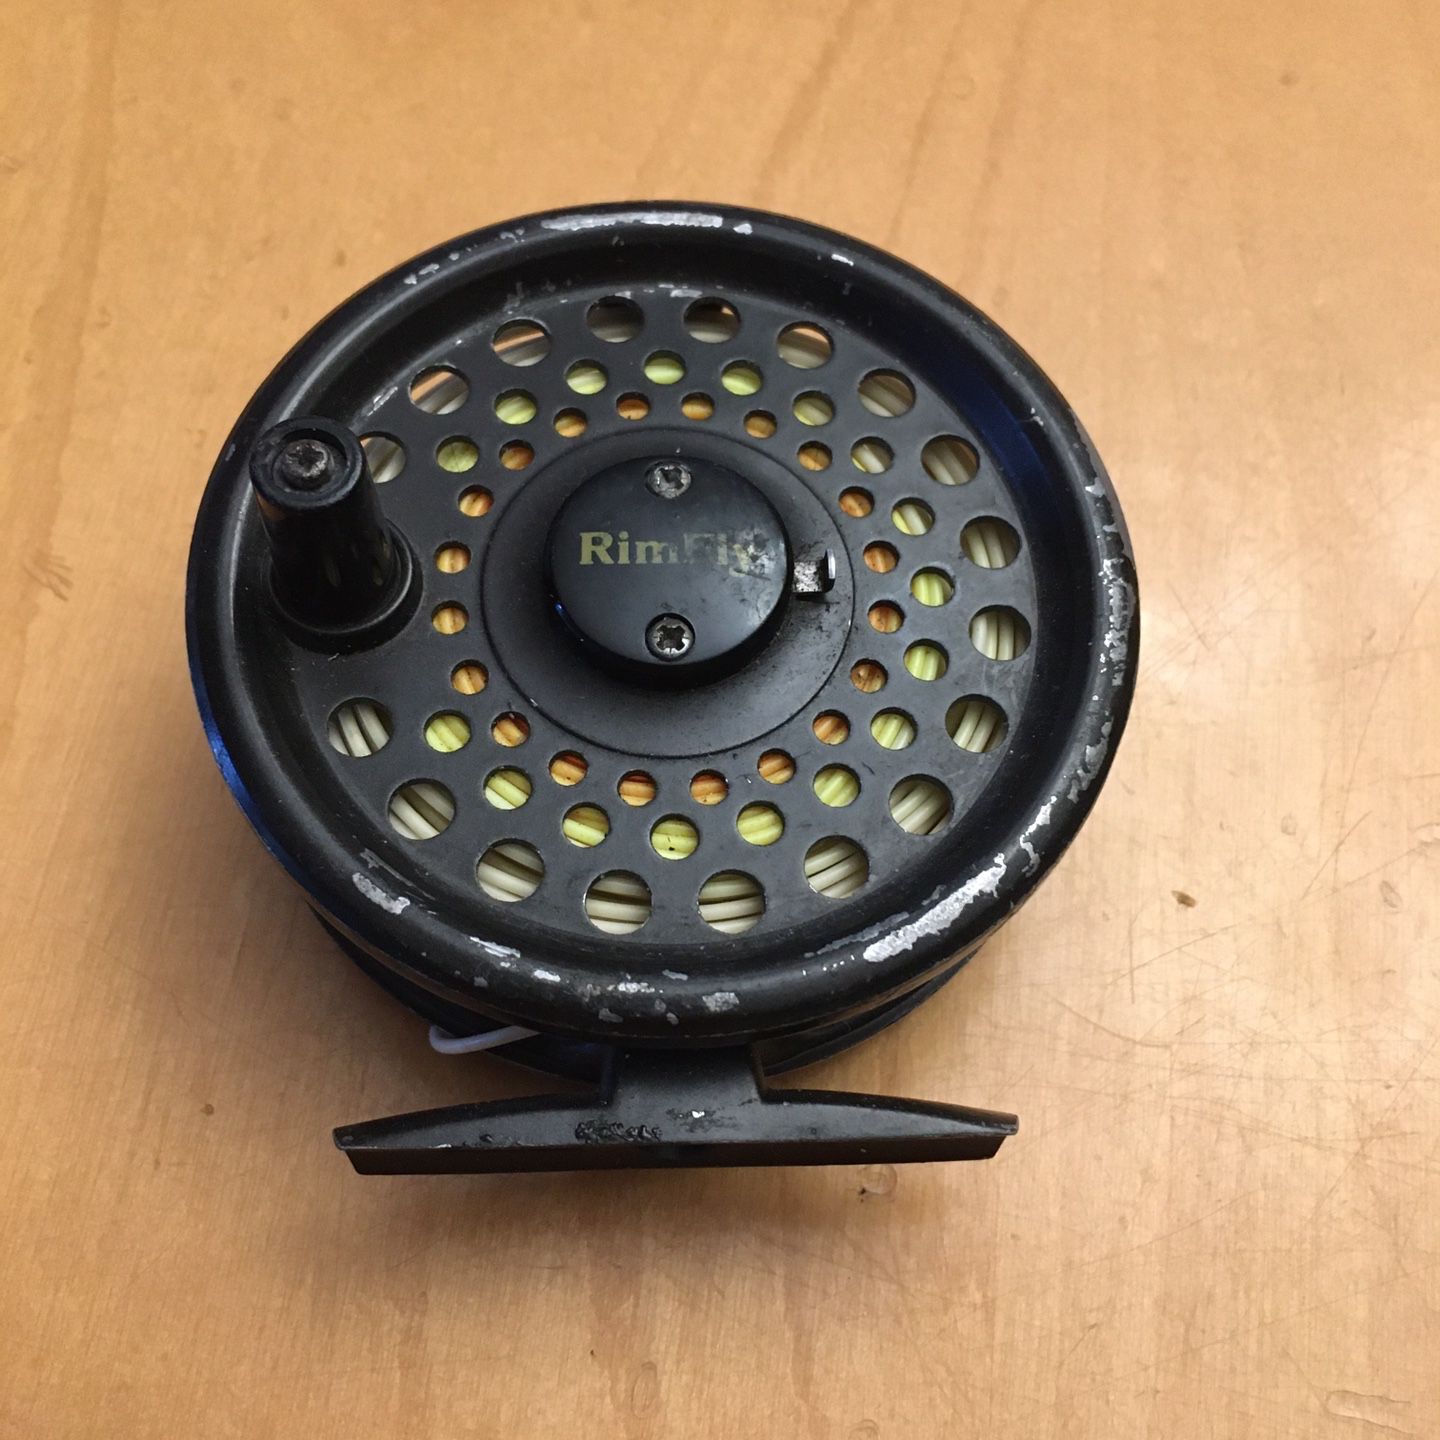 Vintage Cortland Rimfly fly fishing reel Made In England for Sale